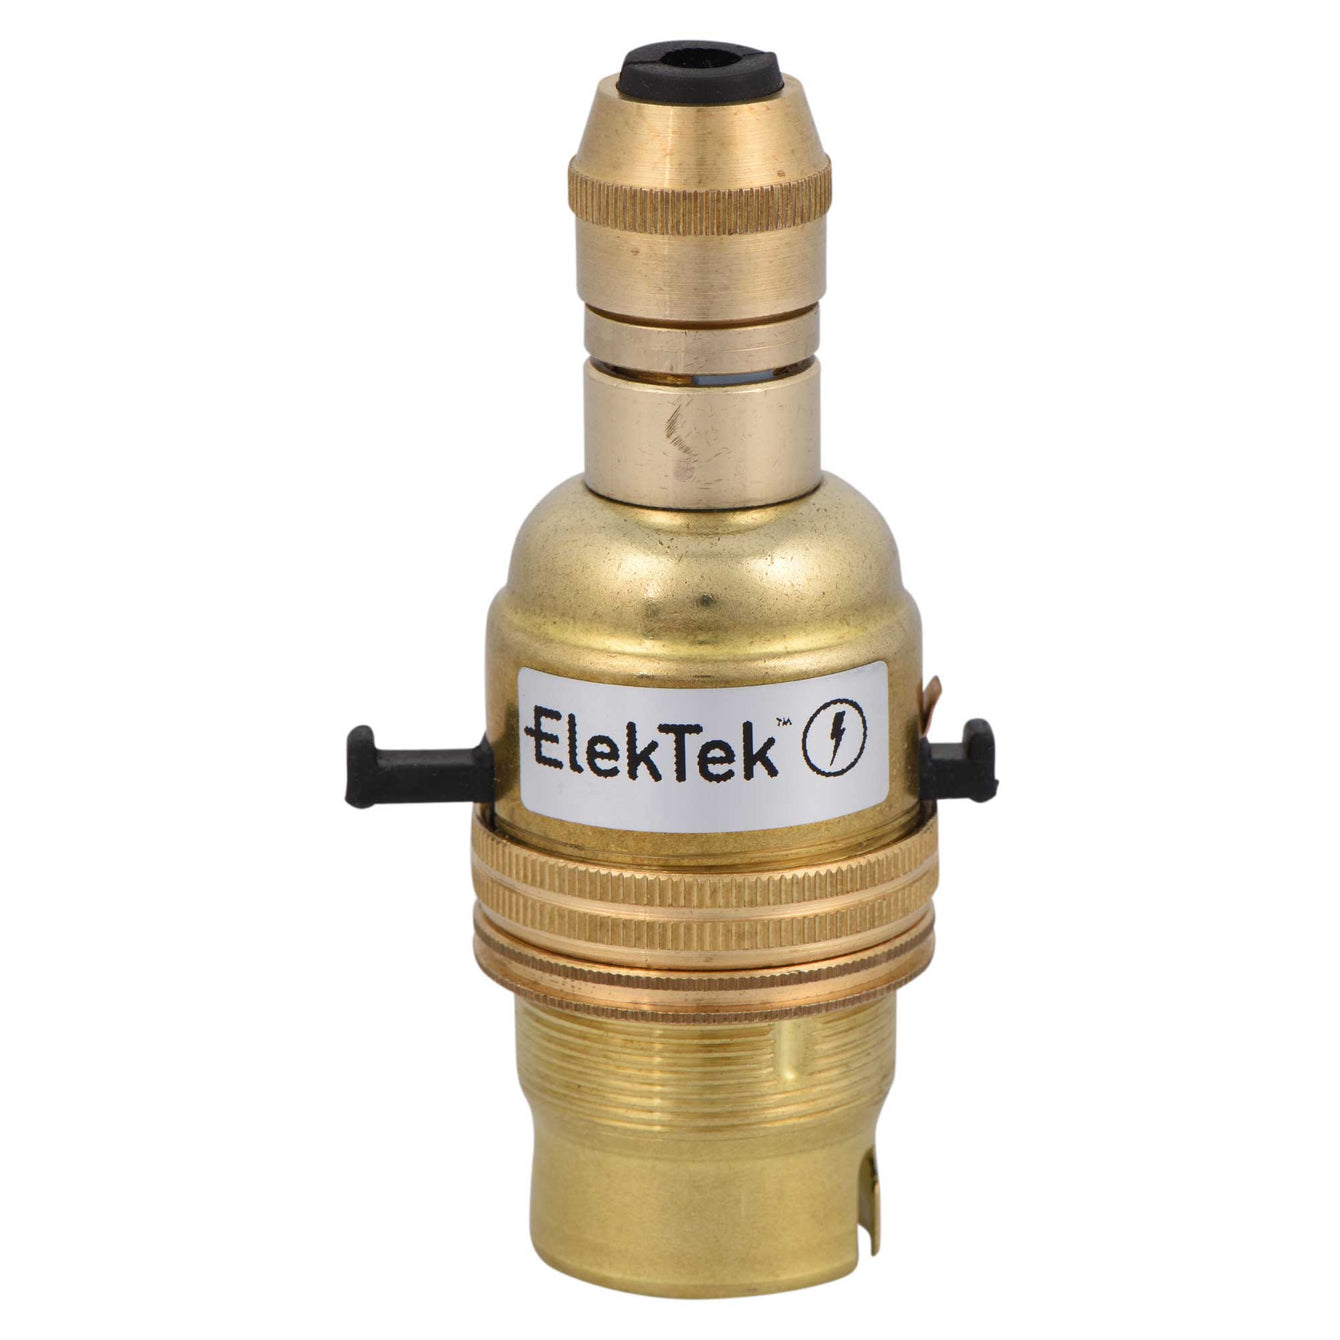 ElekTek Safety Switch Lamp Holder Half Inch Bayonet Cap B22 With Matching Cable Cord Grip Brass Antique Brass